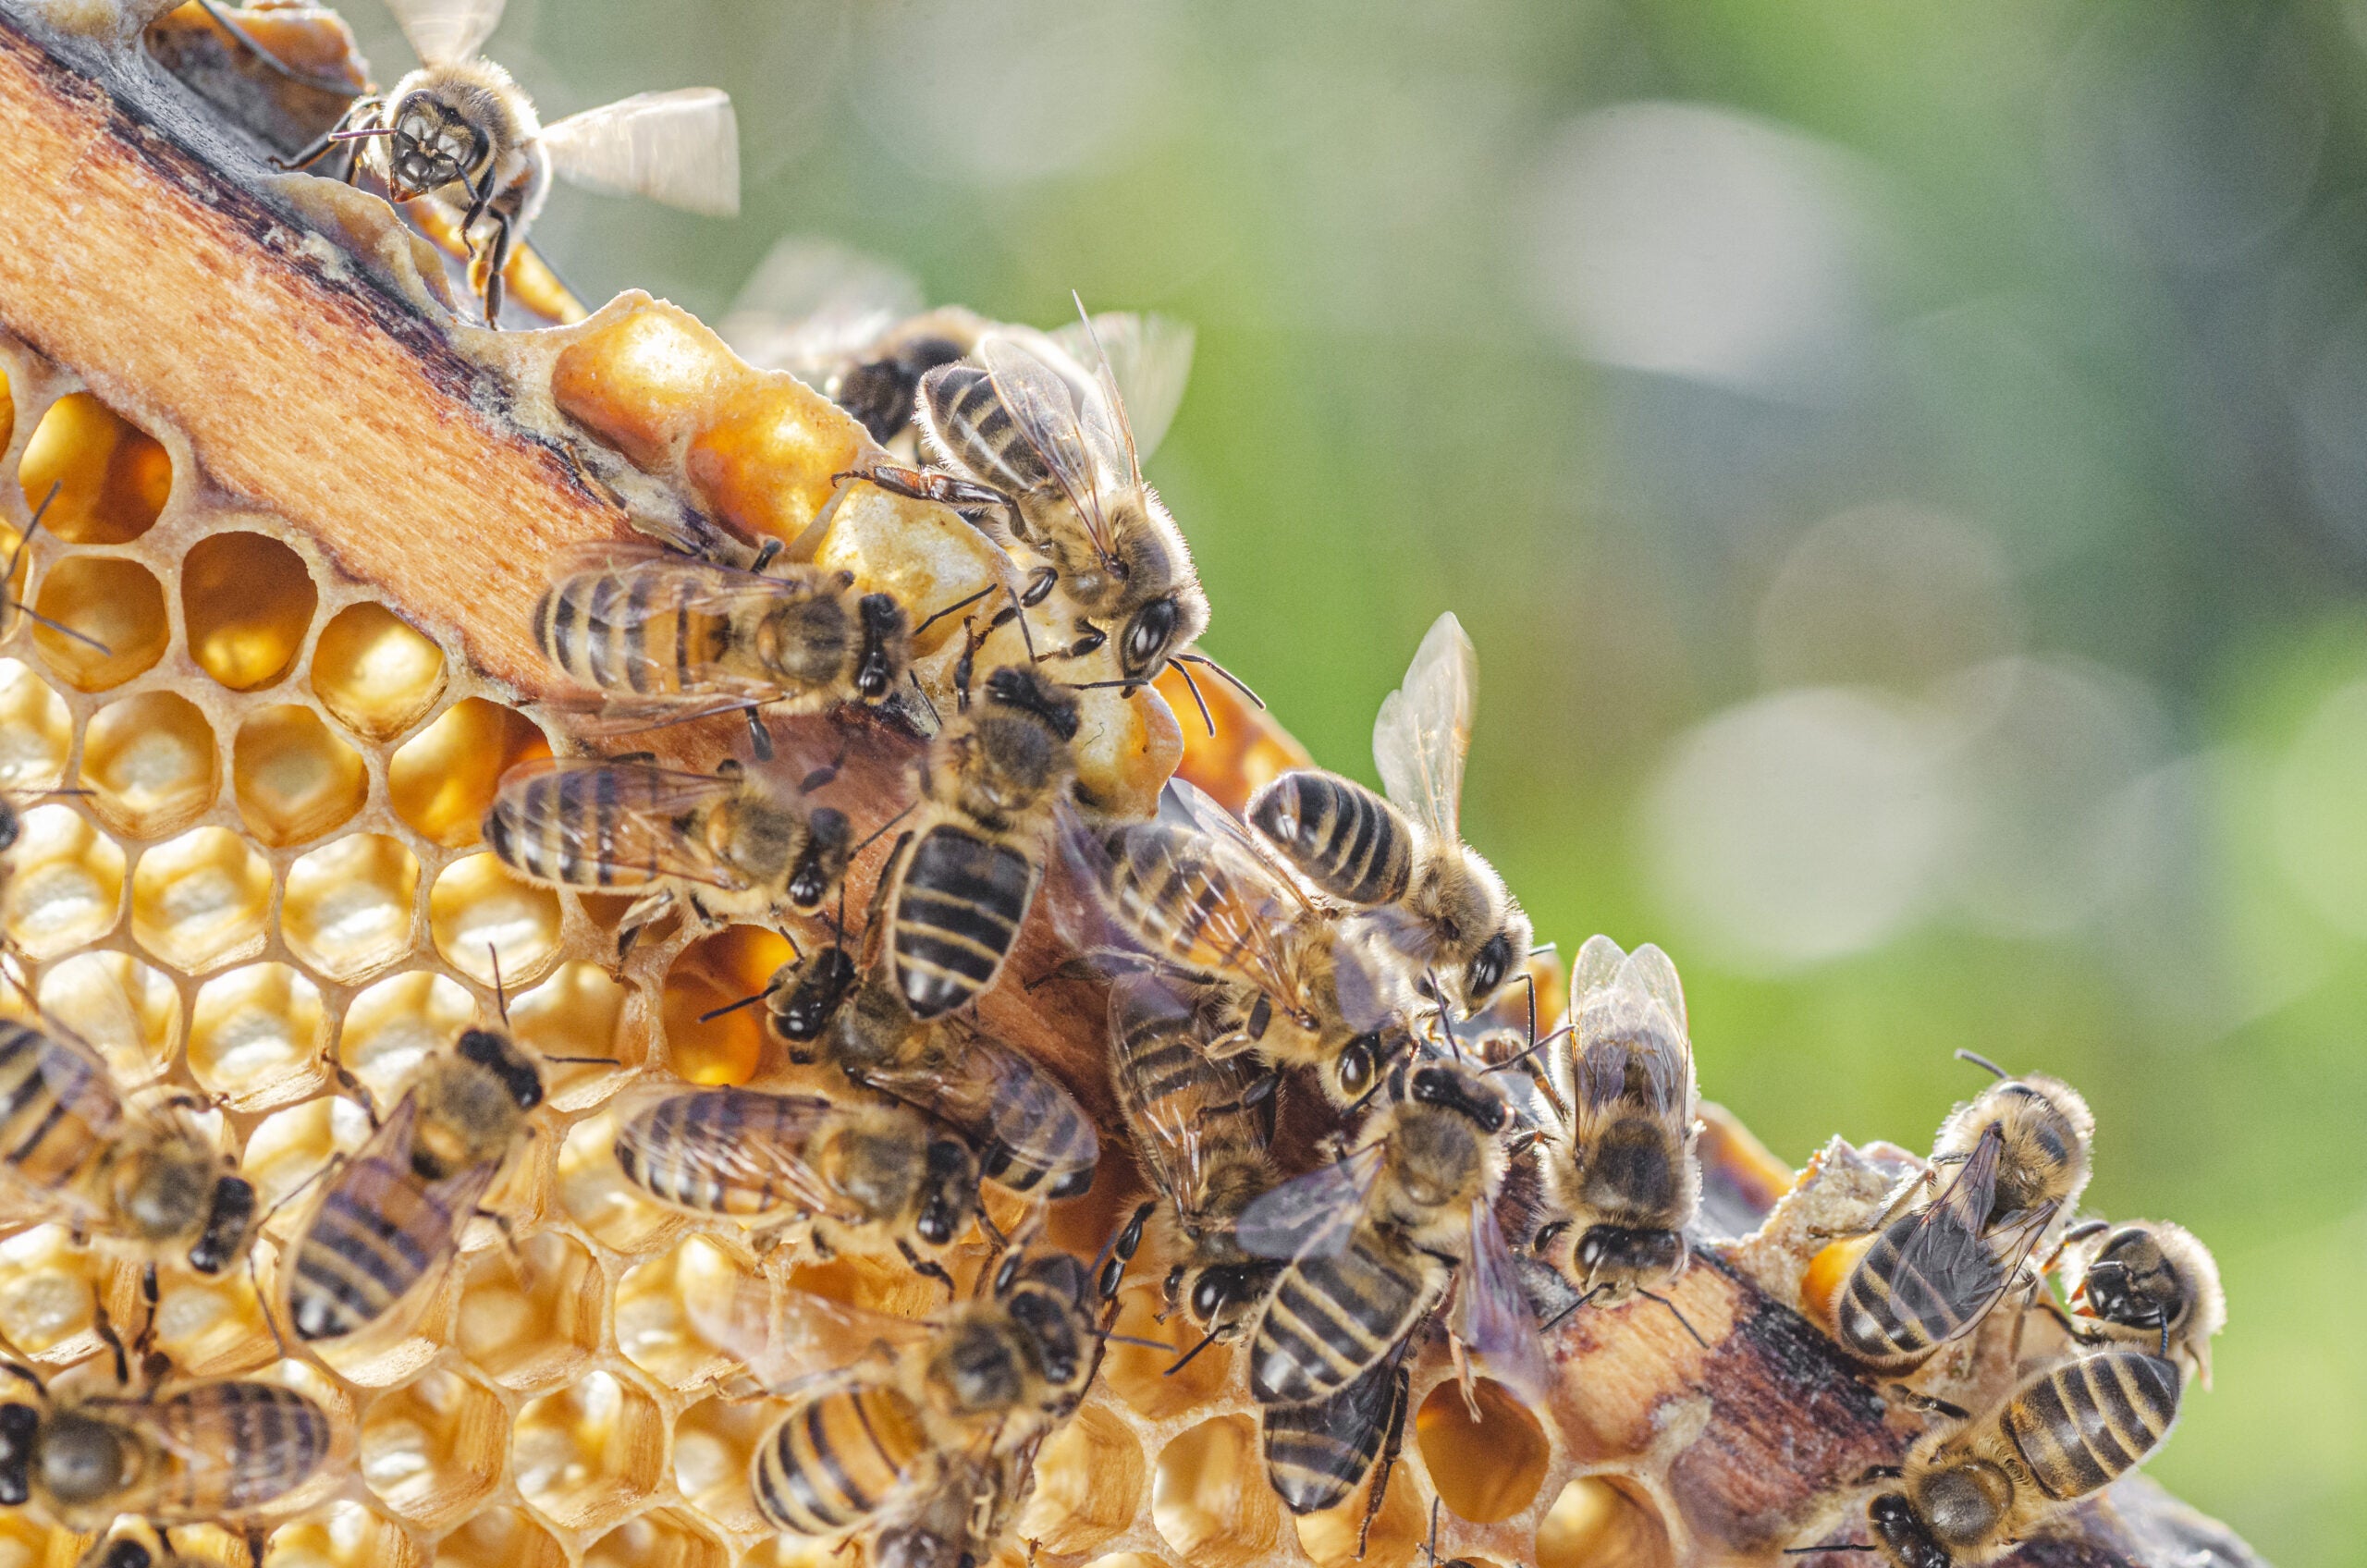 A swarm of bees on a honeycomb.